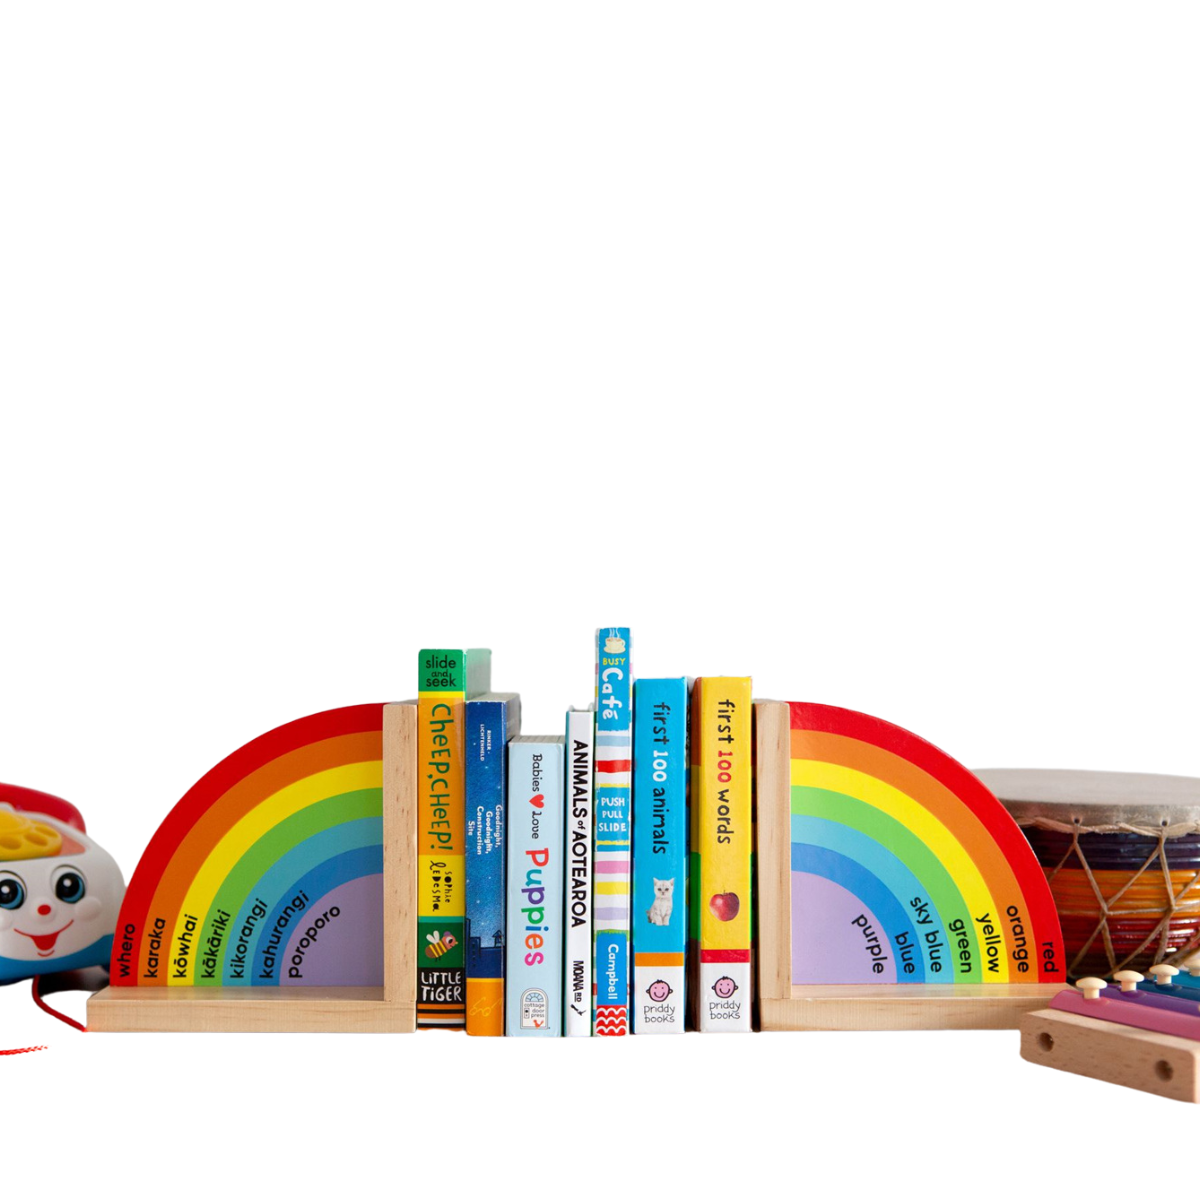 Moana Road Wooden Rainbow Bookends